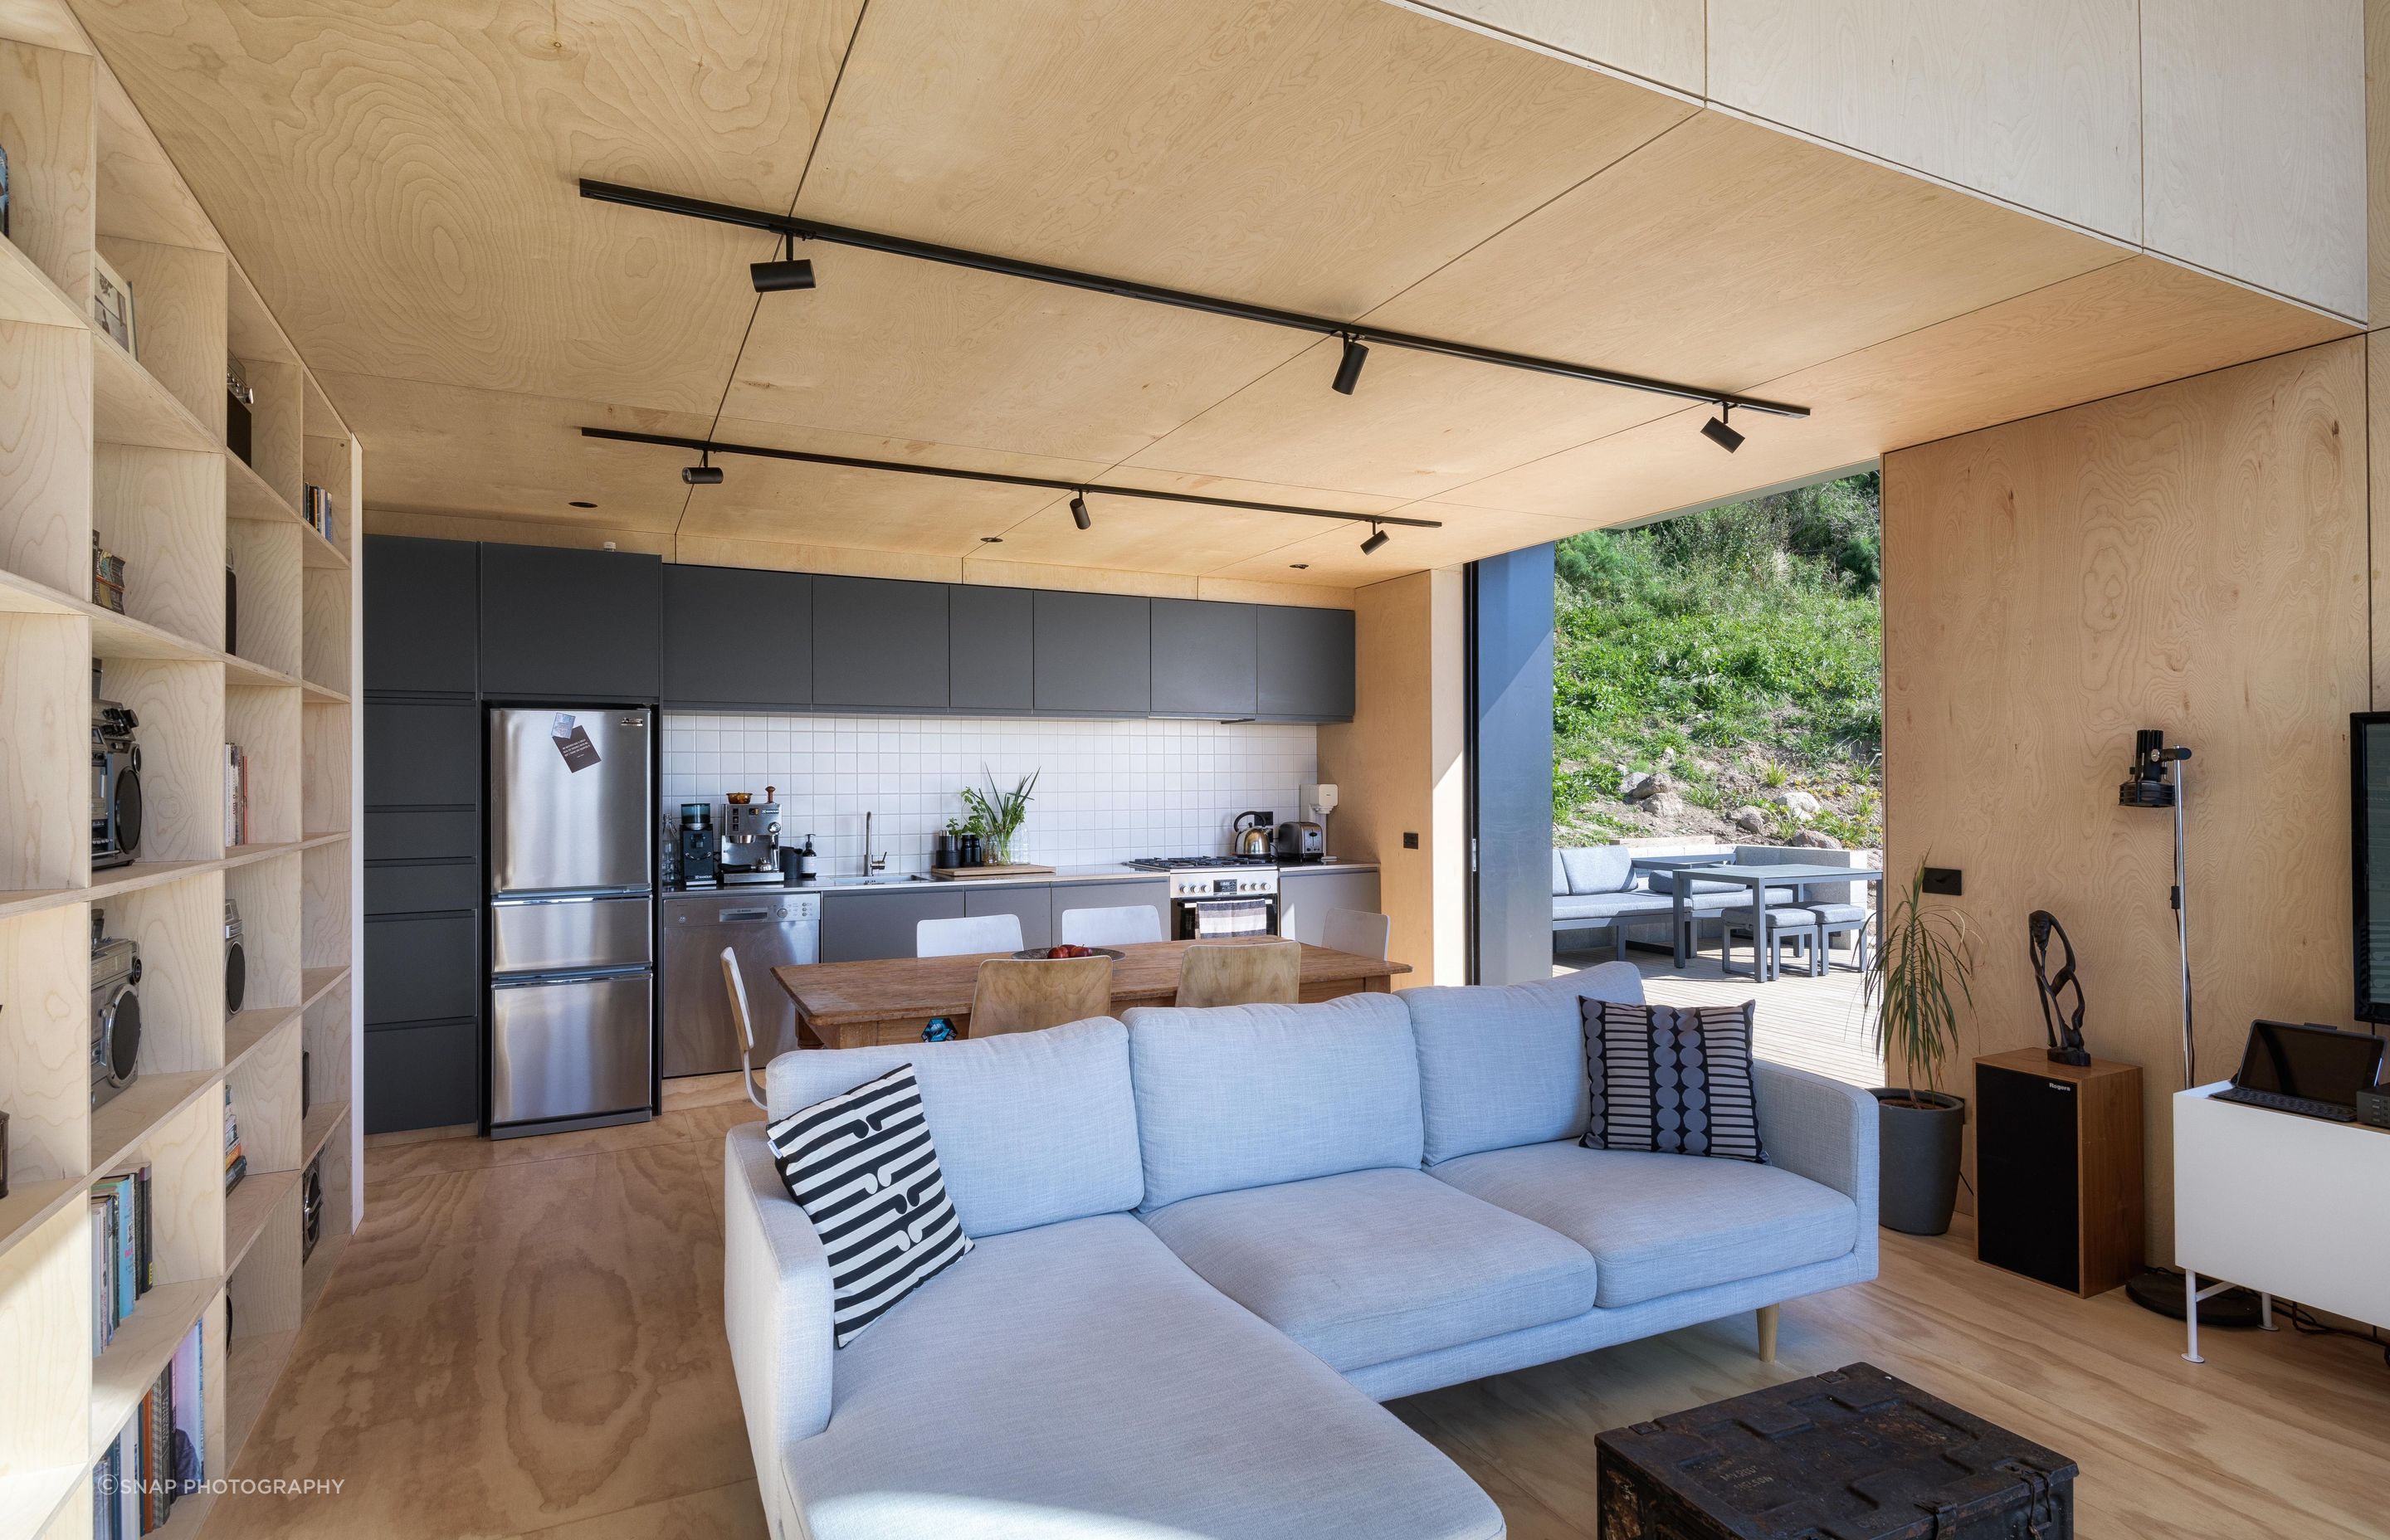 The kitchen fits perfectly into the small footprint of the home